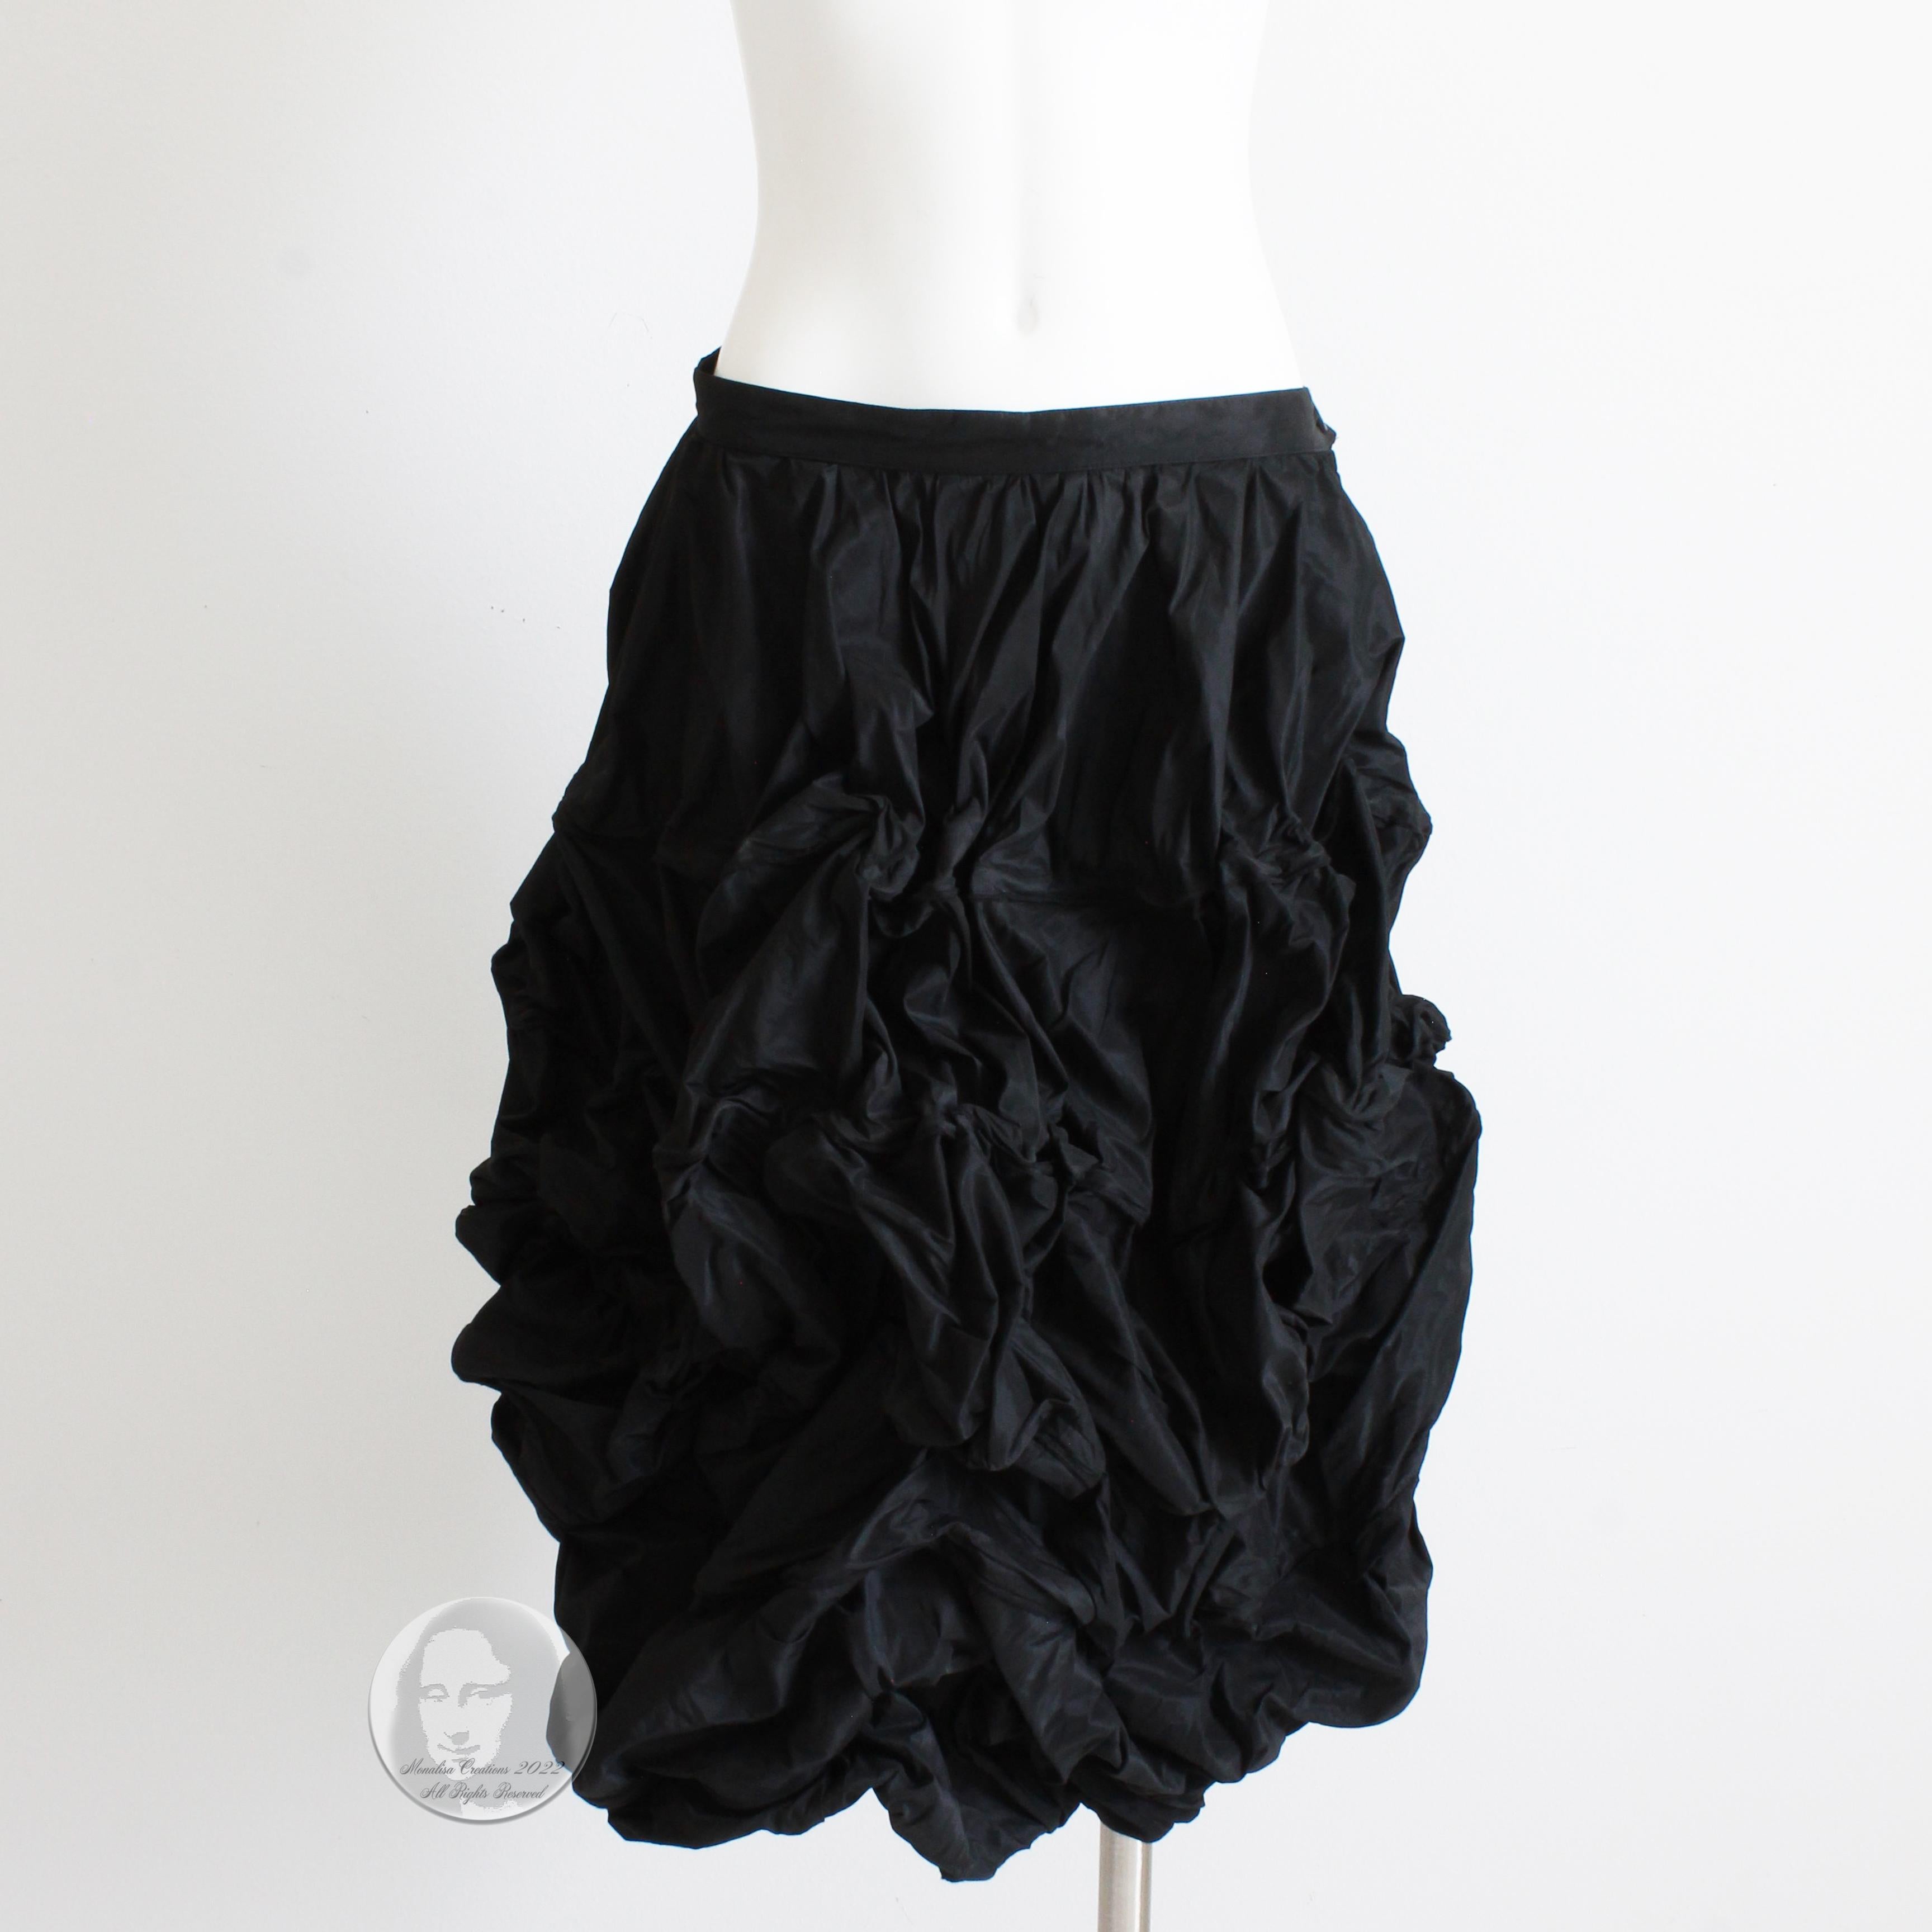 This incredibly rare sculptural skirt was made by Ivan Grundahl Copenhagen in 2010. Made from black microfiber, it features flexible wire boning throughout, allowing one to sculpt and shape the piece in a variety of ways, including use as an over